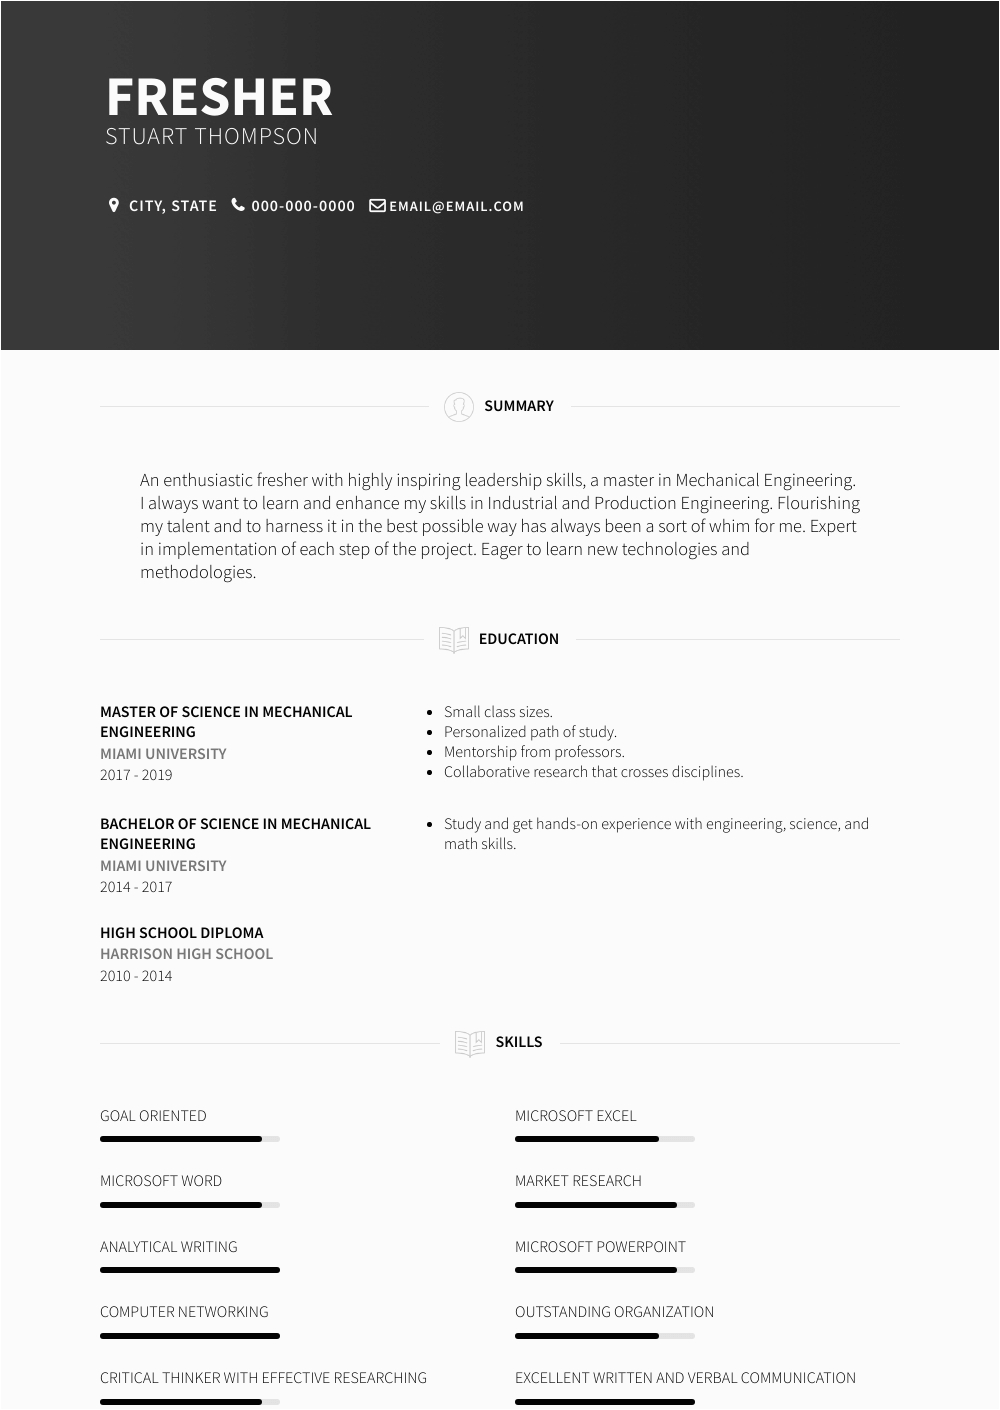 Resume Template for Freshers with Photo Fresher Resume Samples and Templates